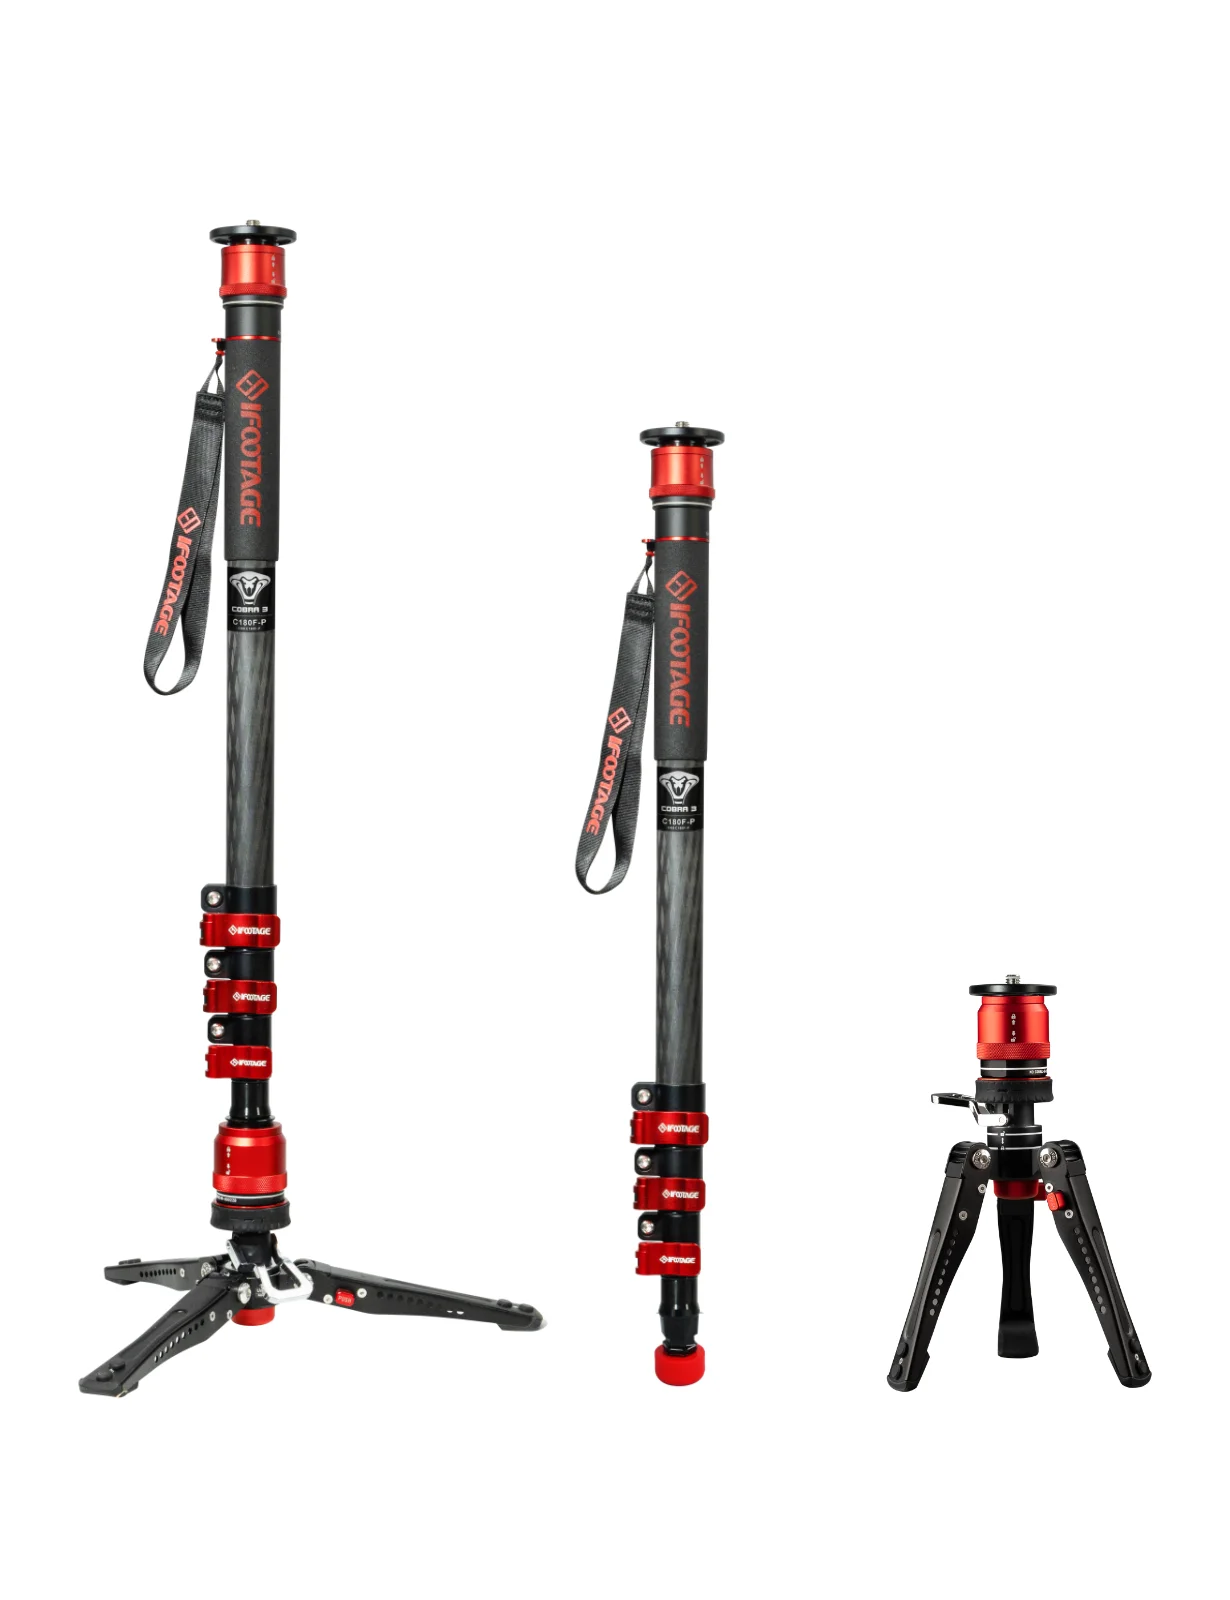 

IFOOTAGE Cobra 3 Monopod for Camera with Pedal Locking C180F-P, 71" Carbon Fiber Travel Monopod, Quick Release, Payload 8KG